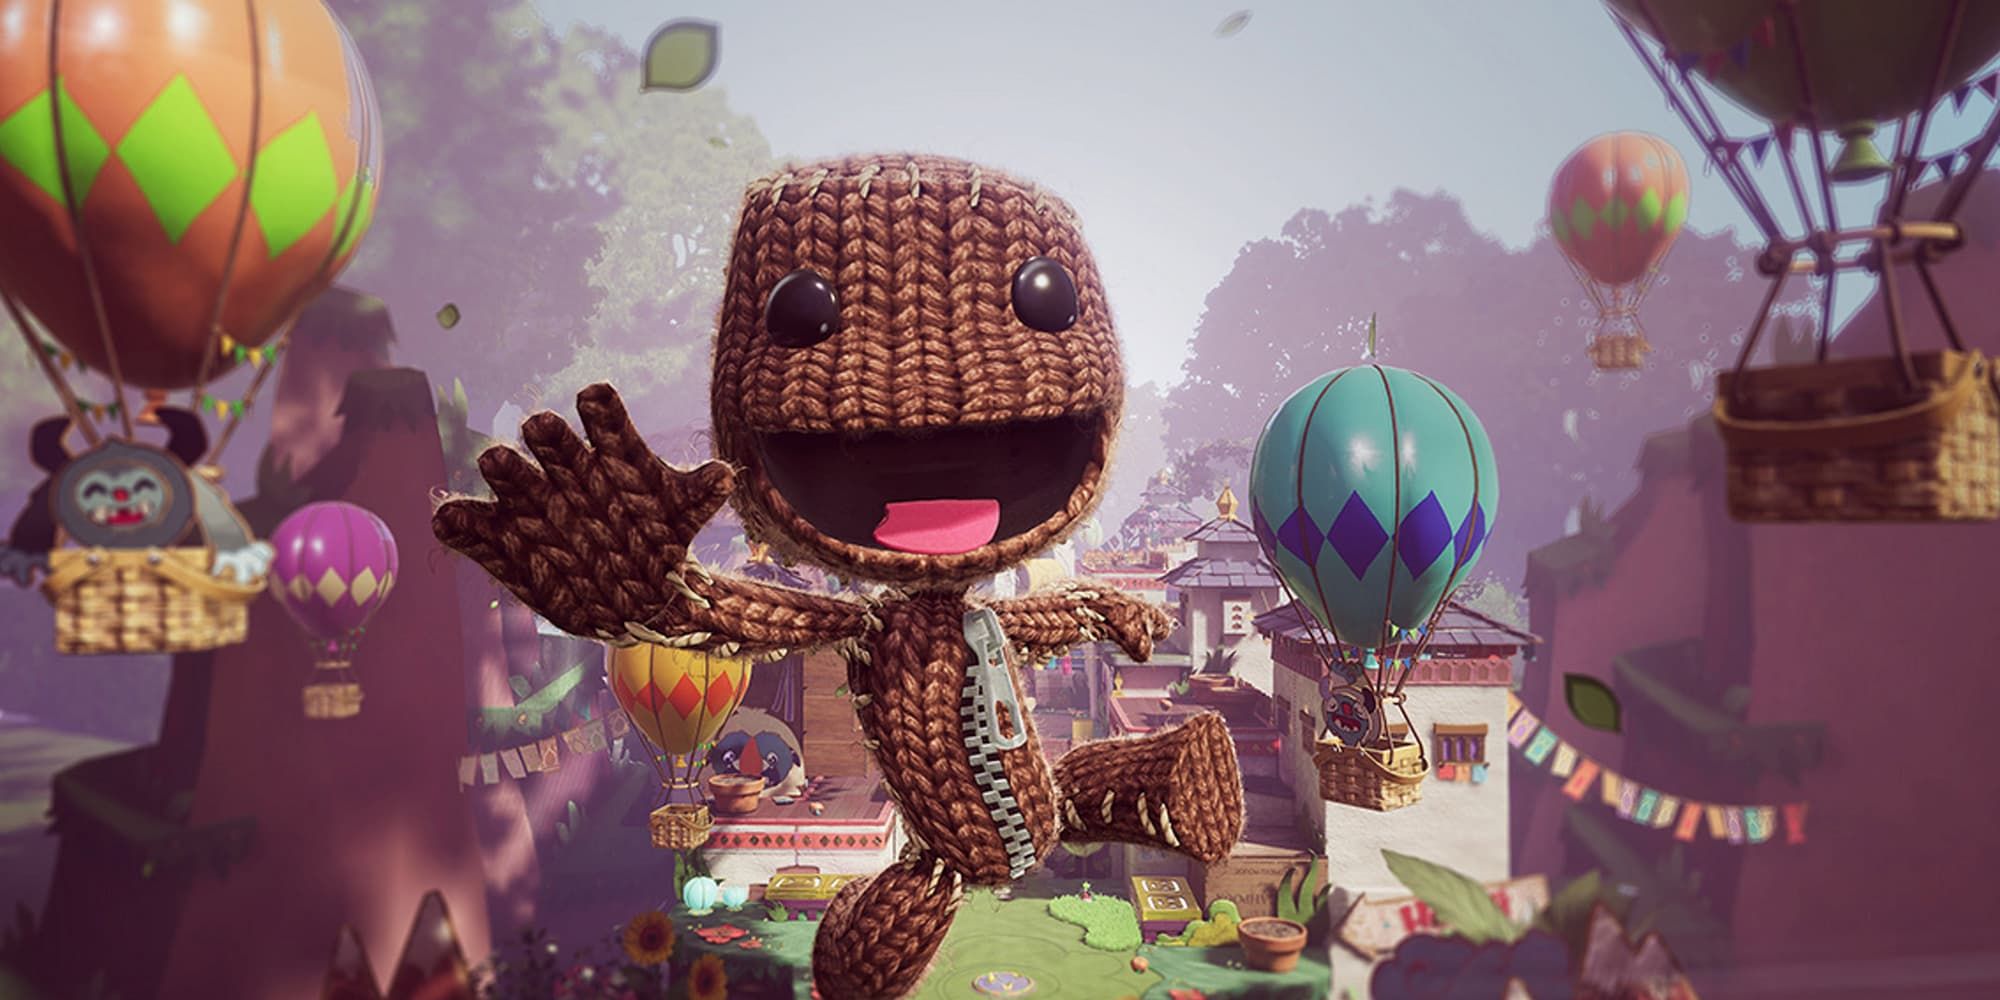 Sackboy leaps forward with a smile as hot air balloons take off behind him in Sackboy: A Big Adventure.